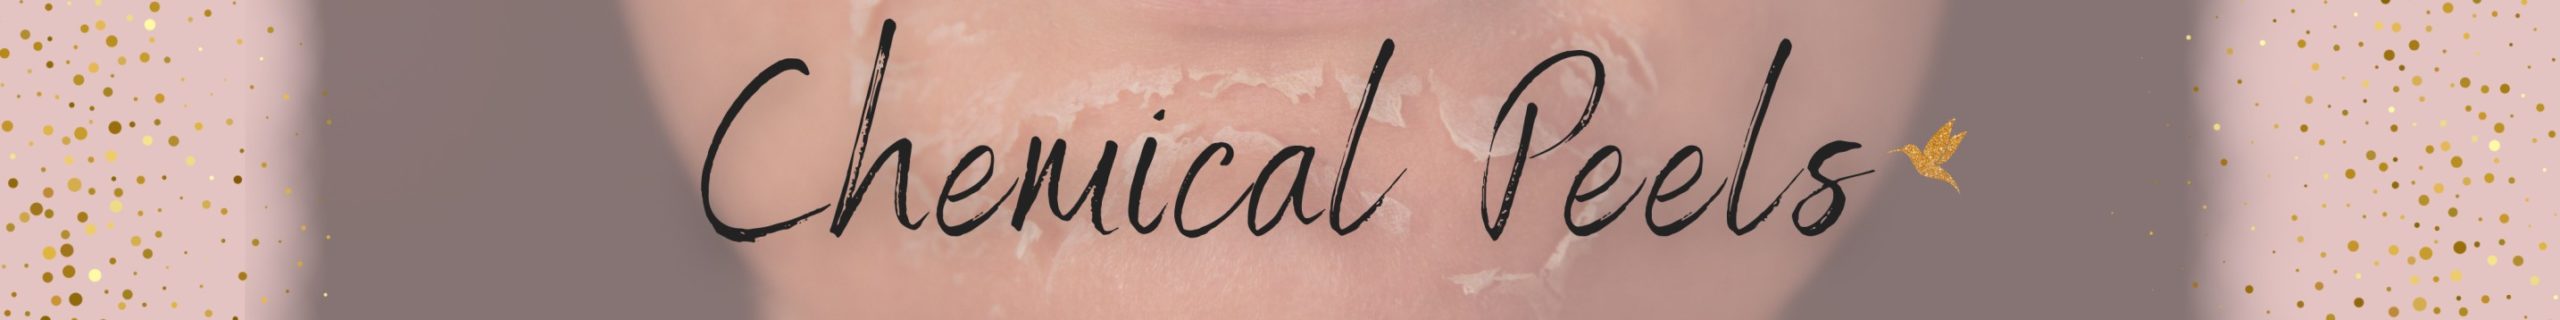 chemical peels in Beleza Medical Aesthetics and Wellness in Severn, MD